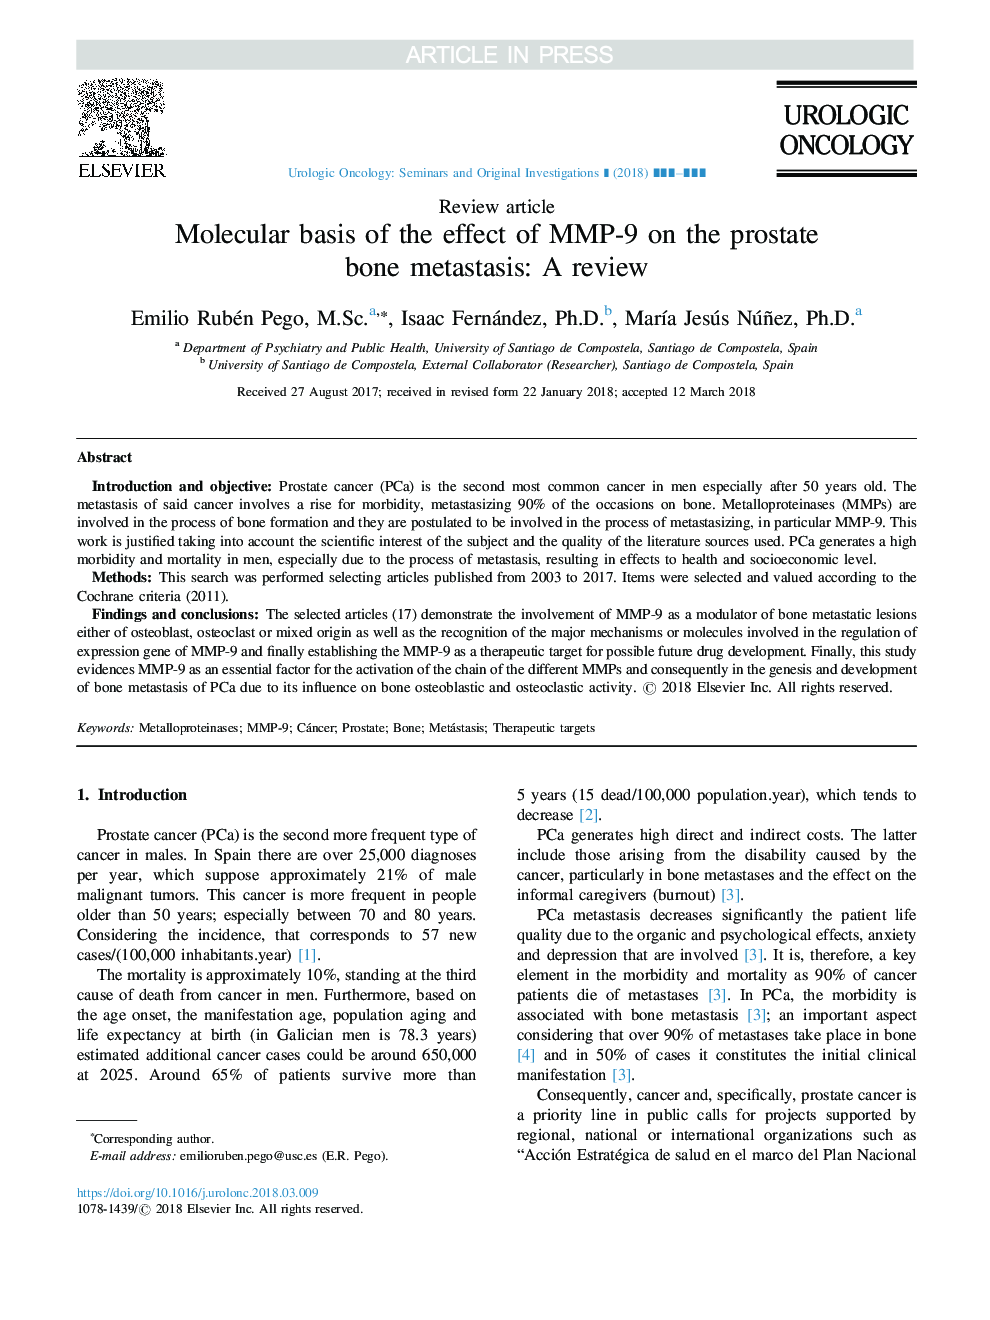 Molecular basis of the effect of MMP-9 on the prostate bone metastasis: A review